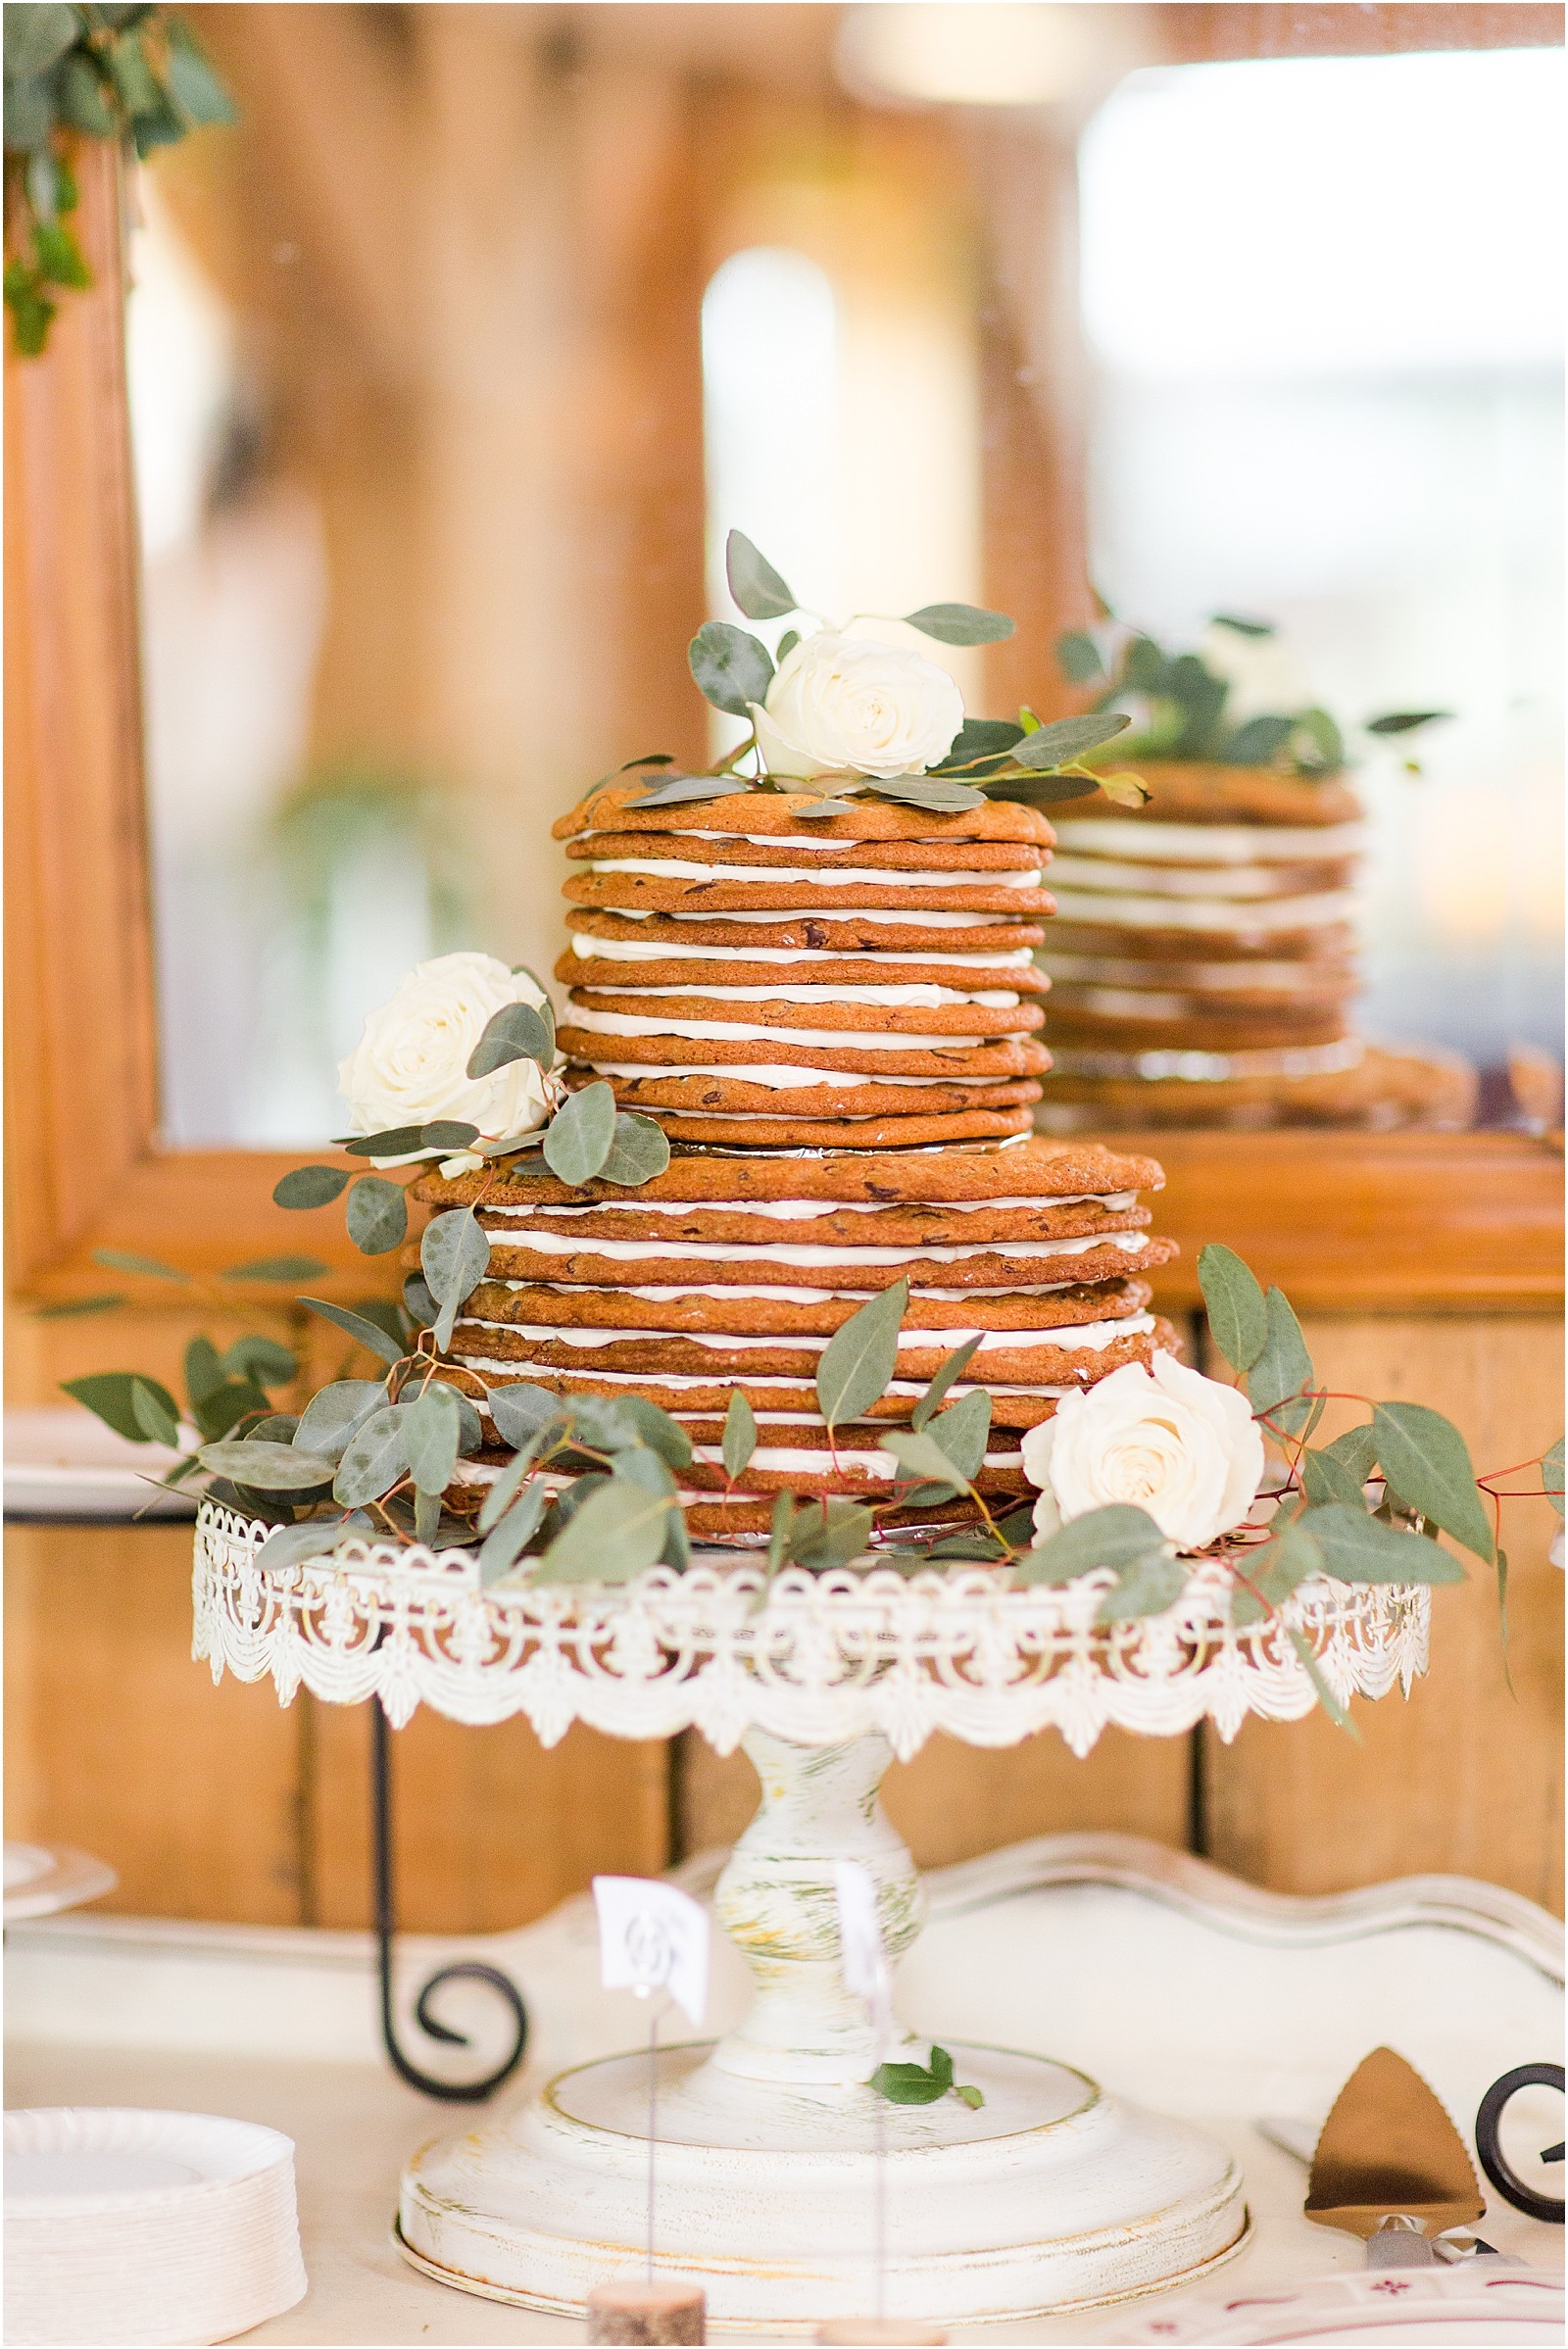 The Corner House Bed and Breakfast Wedding | Meagan and Michael122.jpg